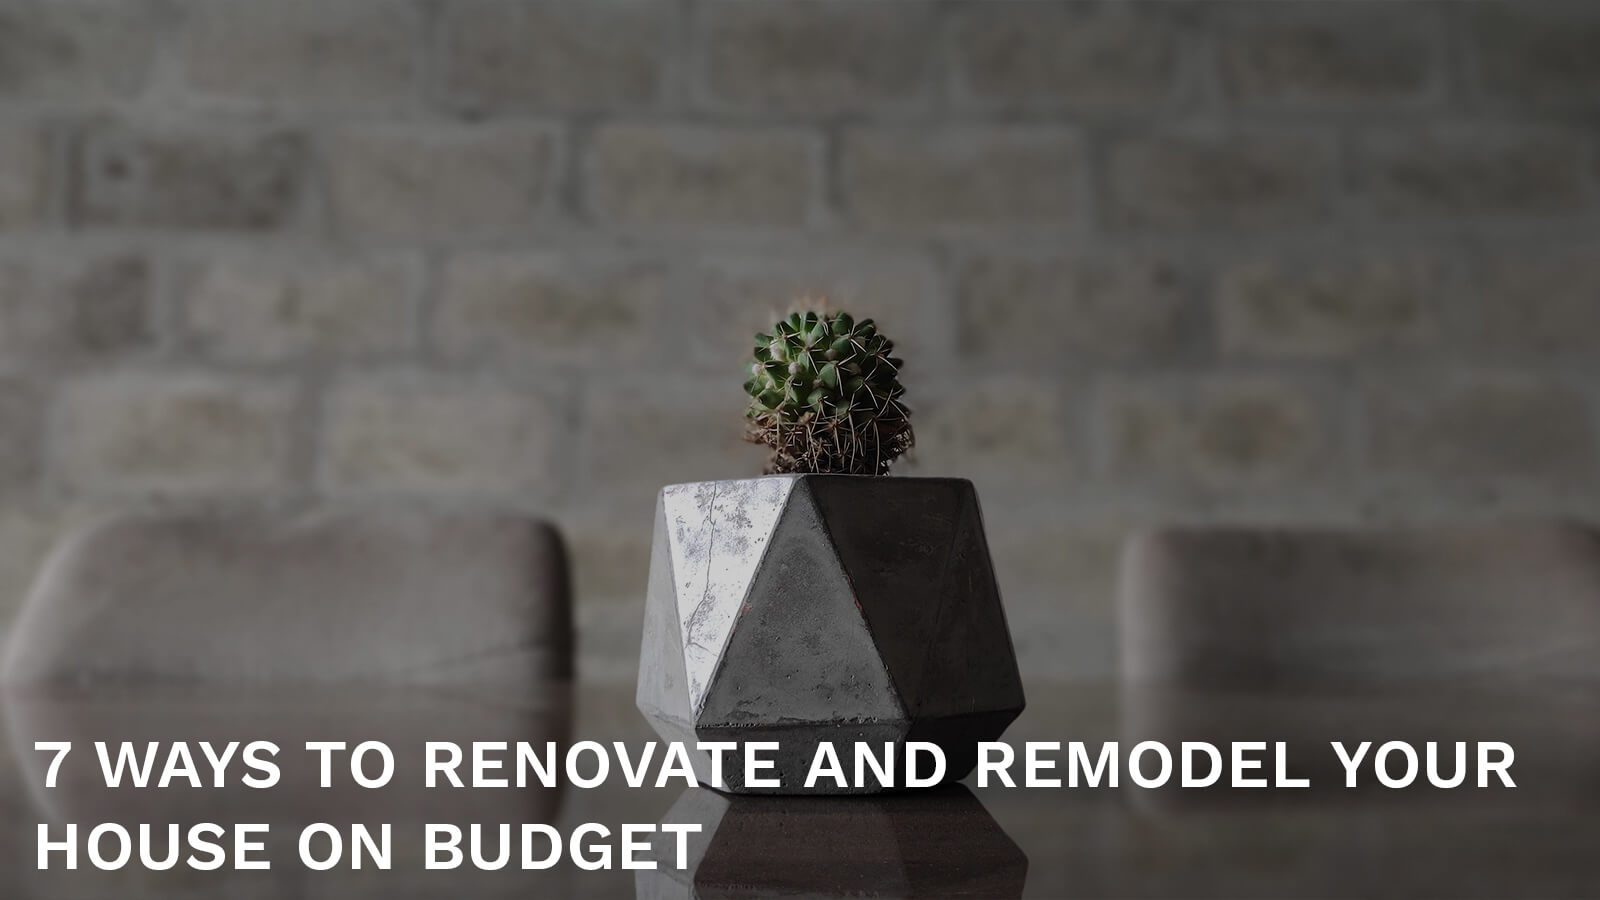 7 Ways to renovate and remodel your house on budget